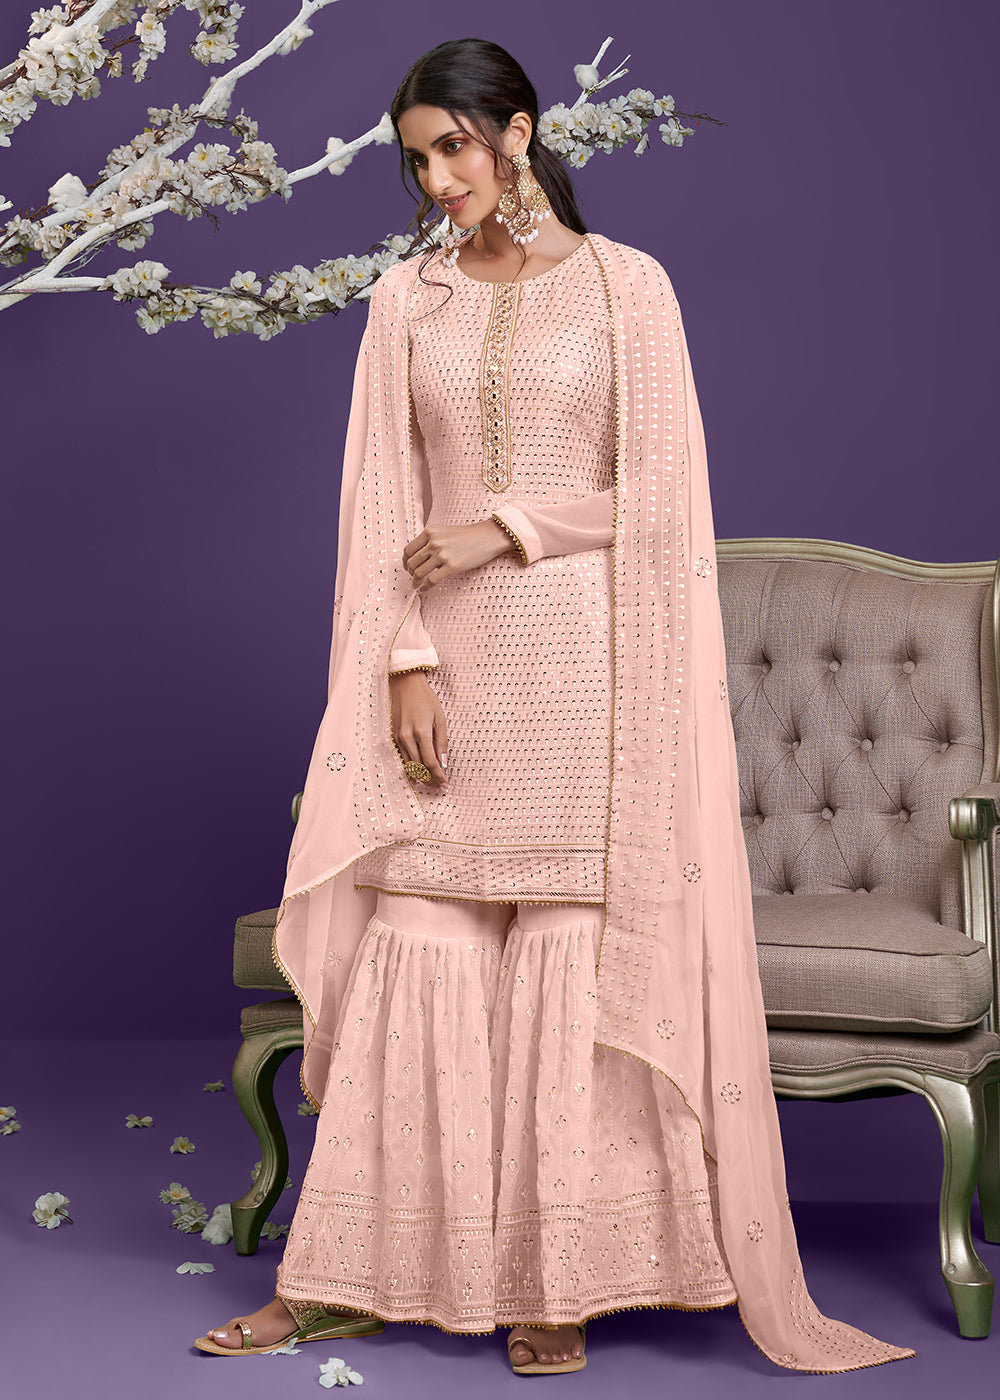 Shop Now Dusty Peach Khatli Work Embroidered Georgette Sharara Suit Online at Empress Clothing in USA, UK, Canada, Germany & Worldwide.